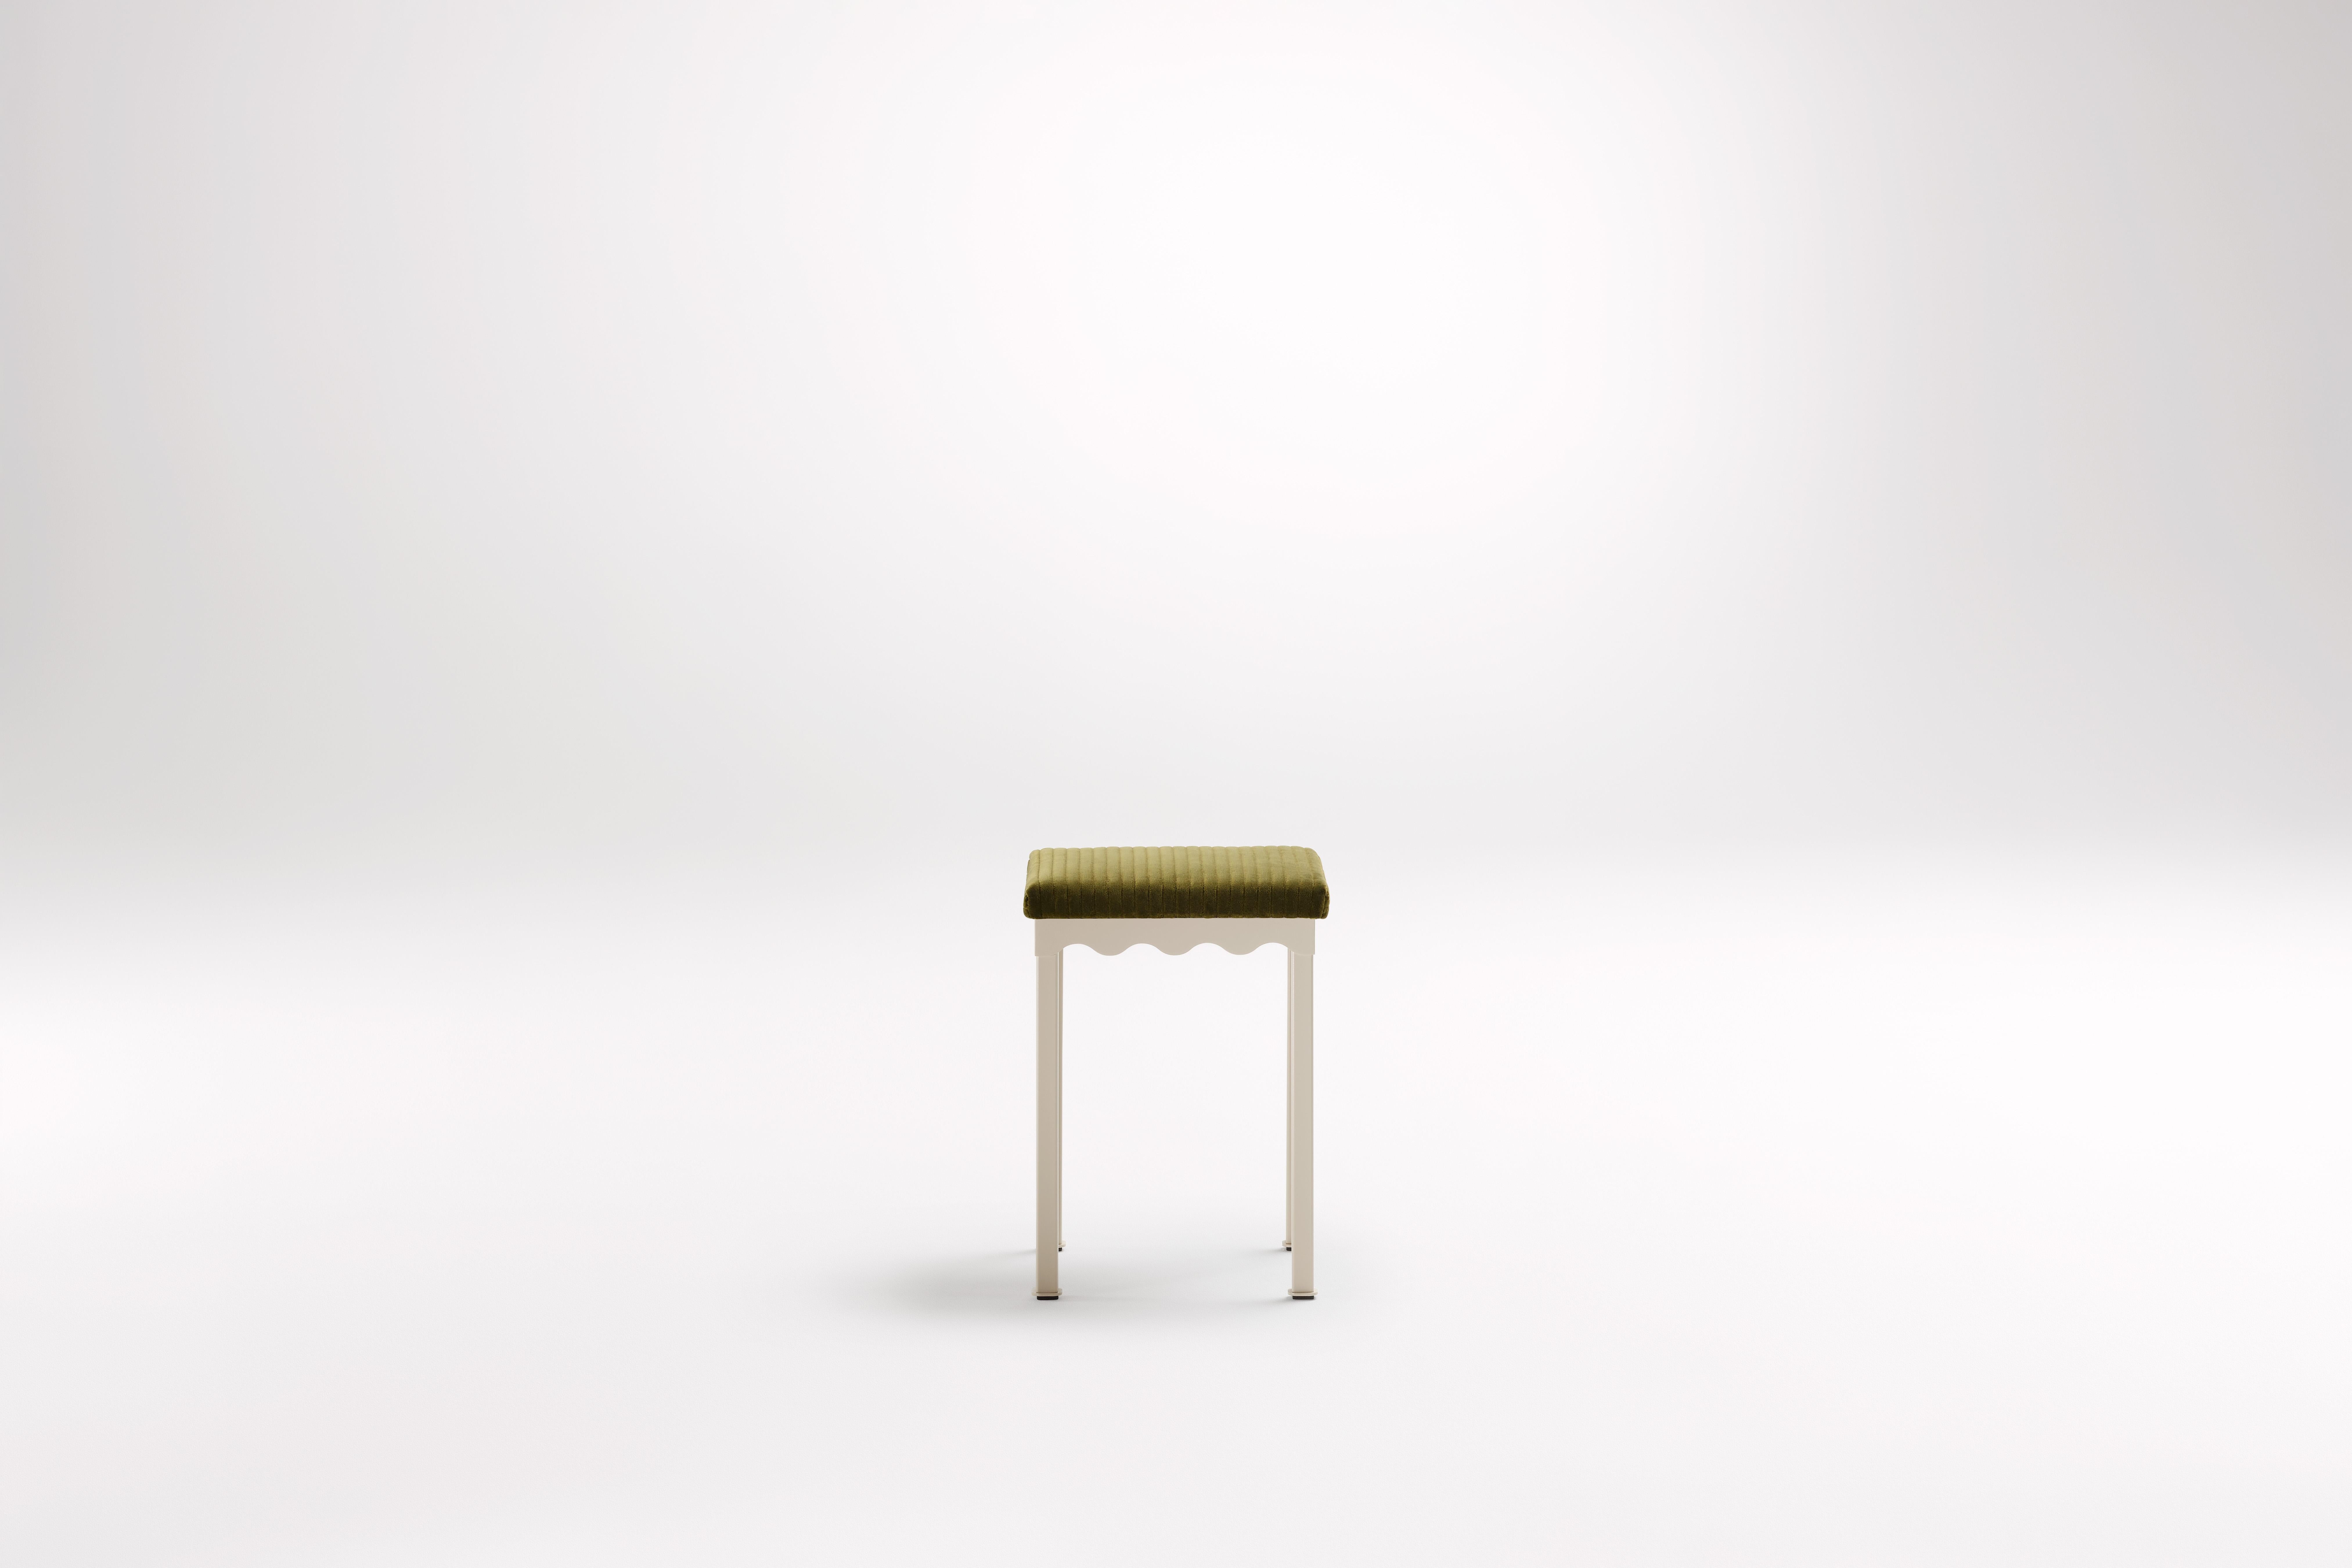 Oleander Bellini Low Stool by Coco Flip
Dimensions: D 34 x W 34 x H 45 cm
Materials: Timber / Stone tops, Powder-coated steel frame. 
Weight: 5 kg
Frame Finishes: Textura Paperbark.

Coco Flip is a Melbourne based furniture and lighting design